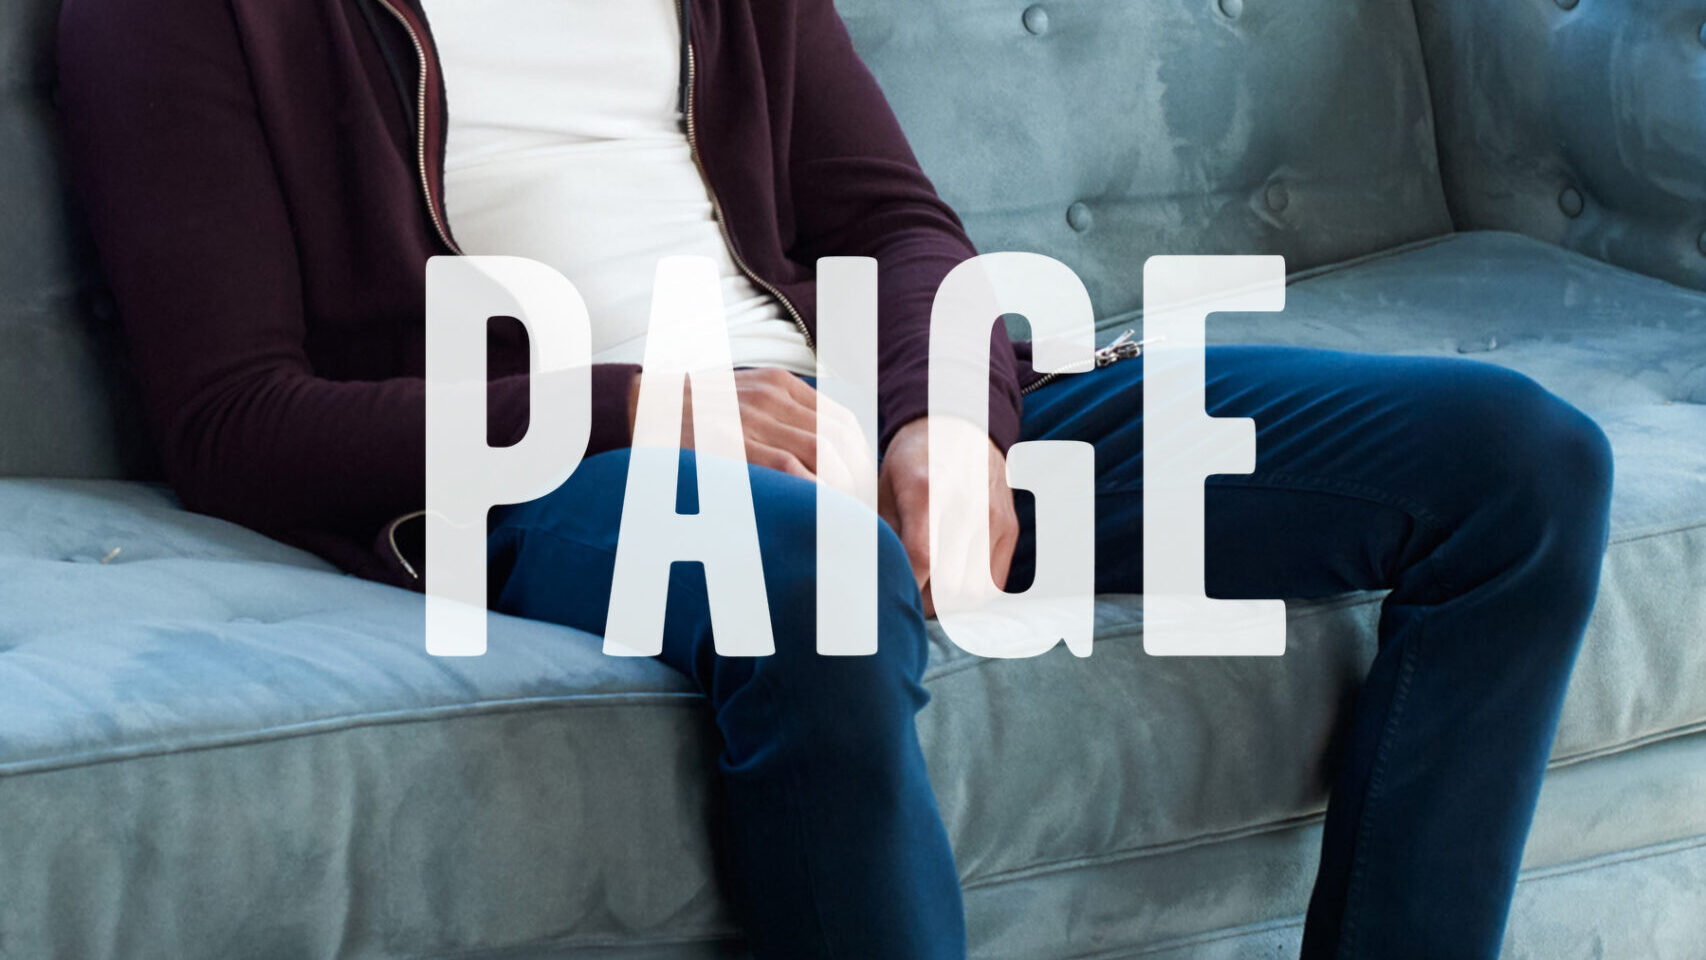 PAIGE logo overlay on an image of a person wearing jeans, sitting on a couch